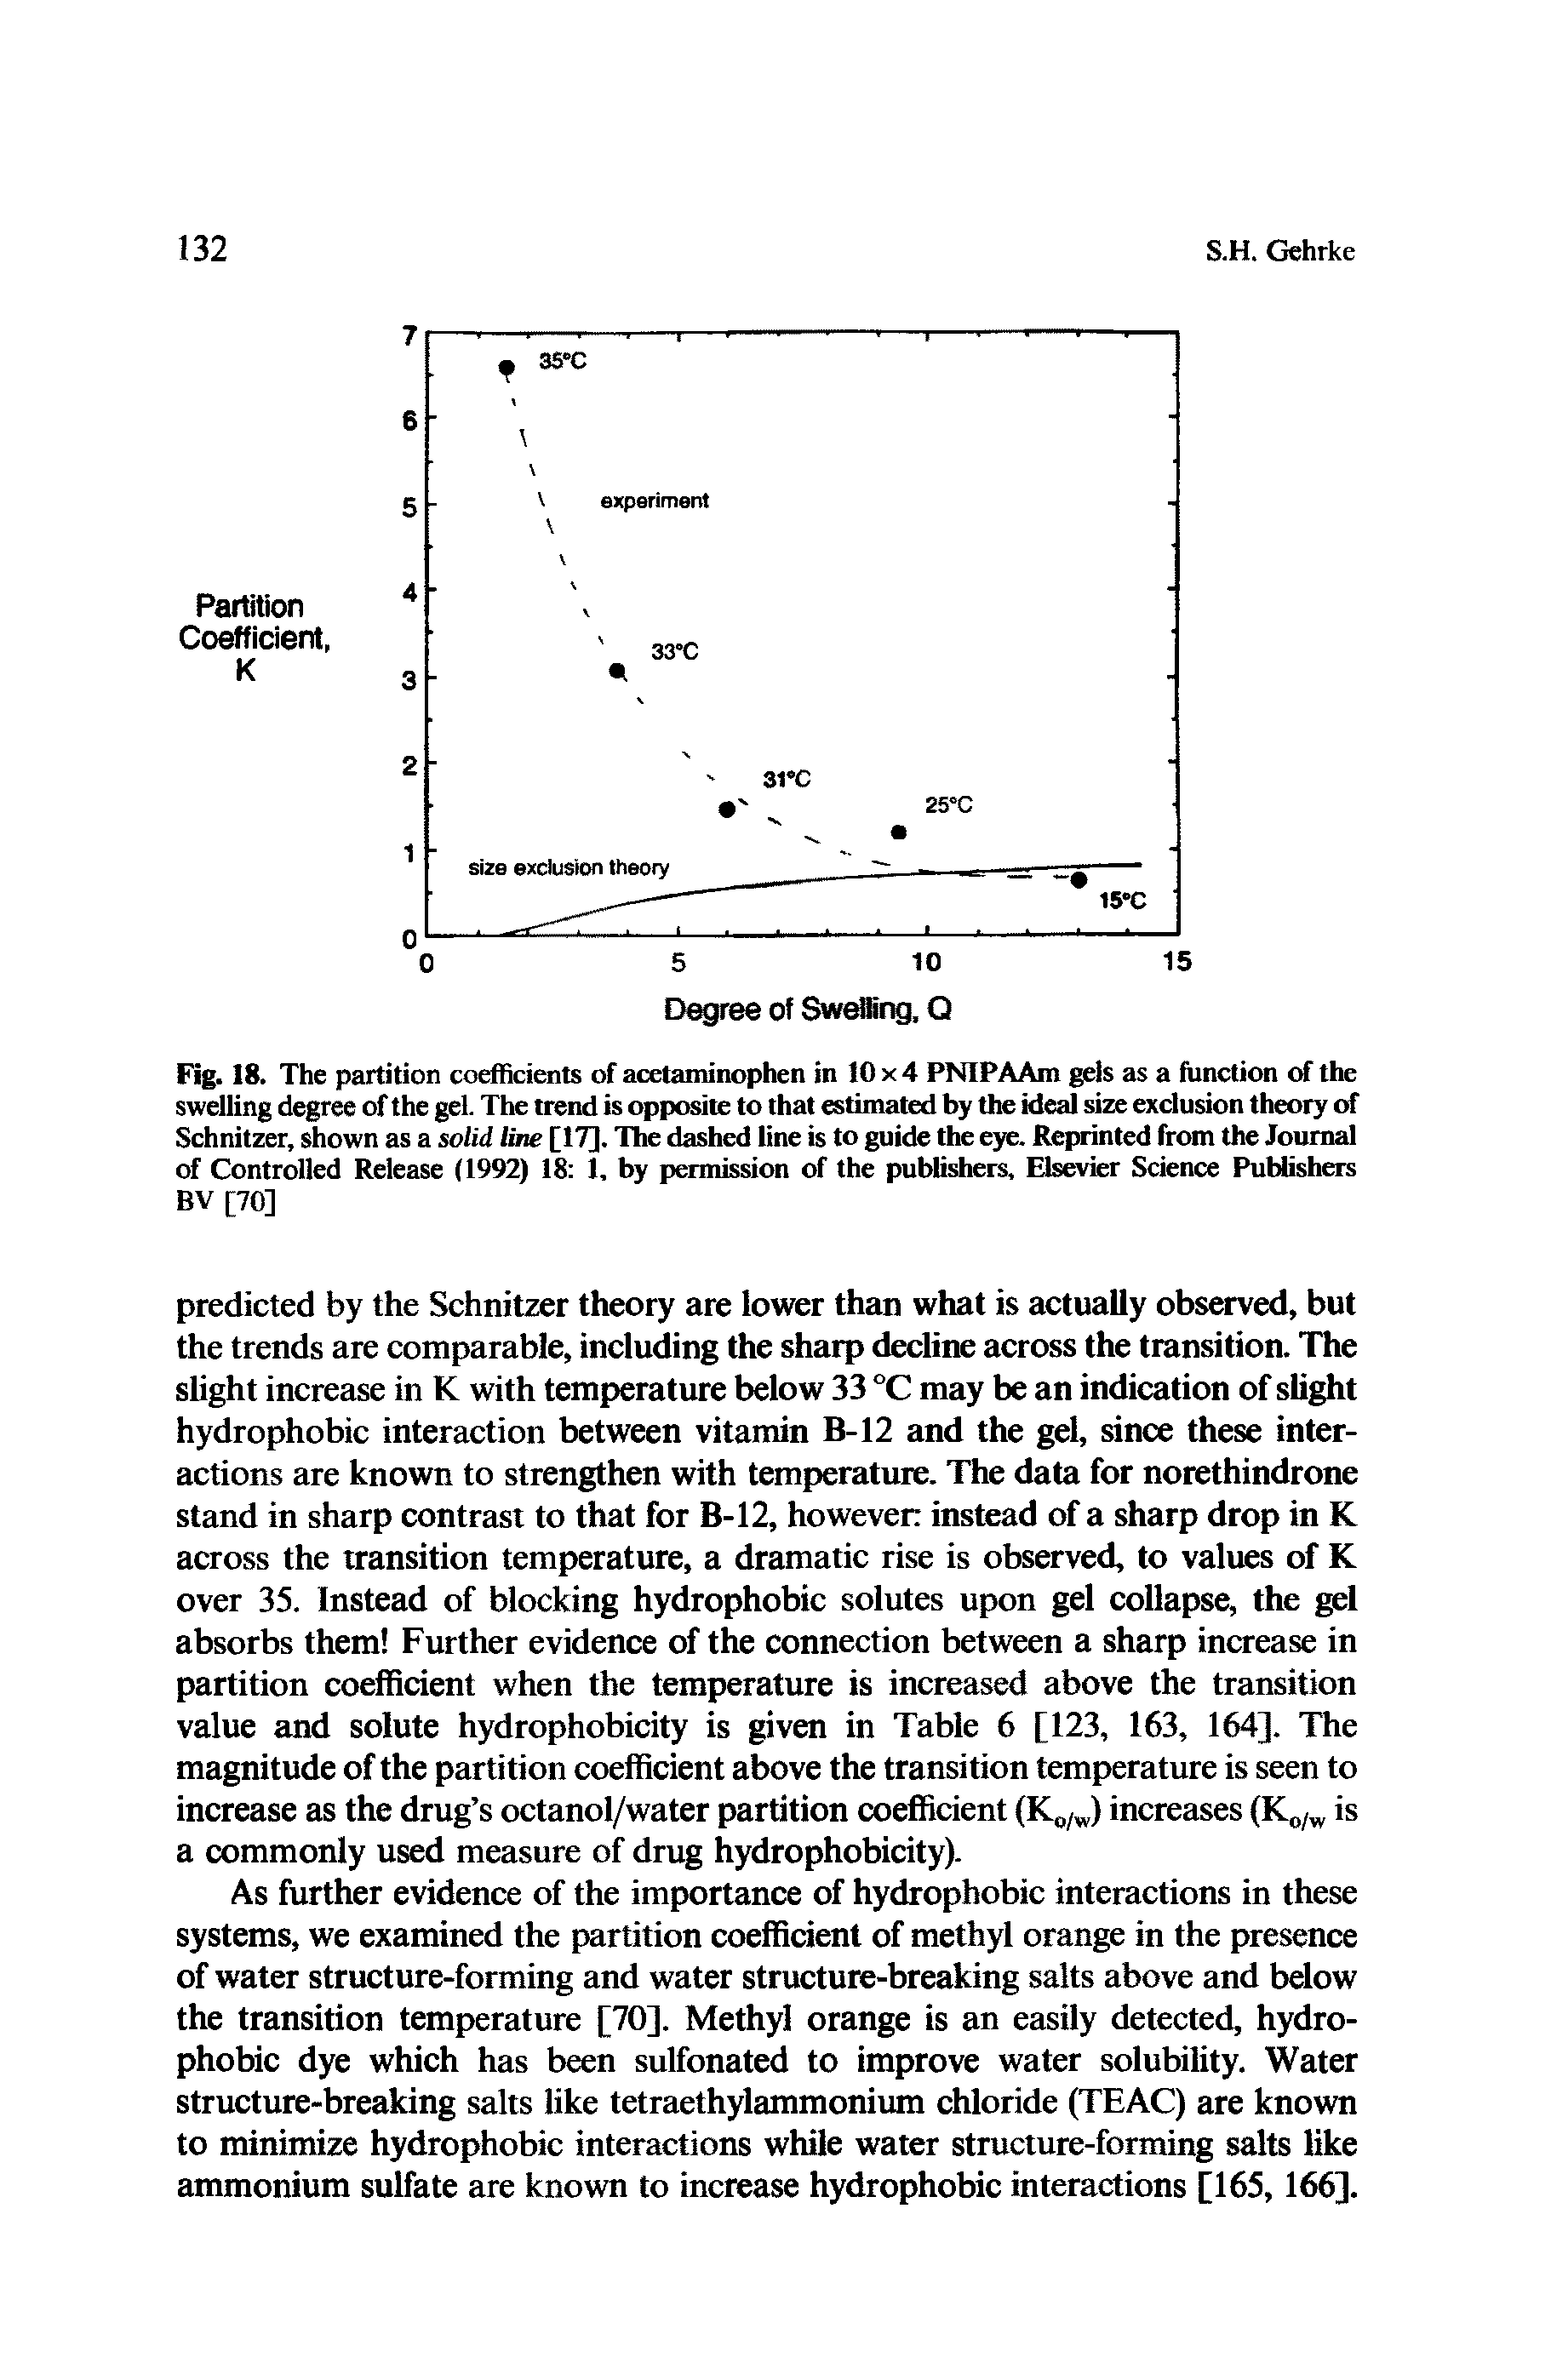 Fig. 18. The partition coefficients of acetaminophen in 10 x 4 PNIPAAm gels as a function of the swelling degree of the gel. The trend is opposite to that estimated by the ideal size exclusion theory of Schnitzer, shown as a solid line [17]. The dashed line is to guide the eye. Reprinted from the Journal of Controlled Release (1992) 18 1, by permission of the publishers, Elsevier Science Publishers...